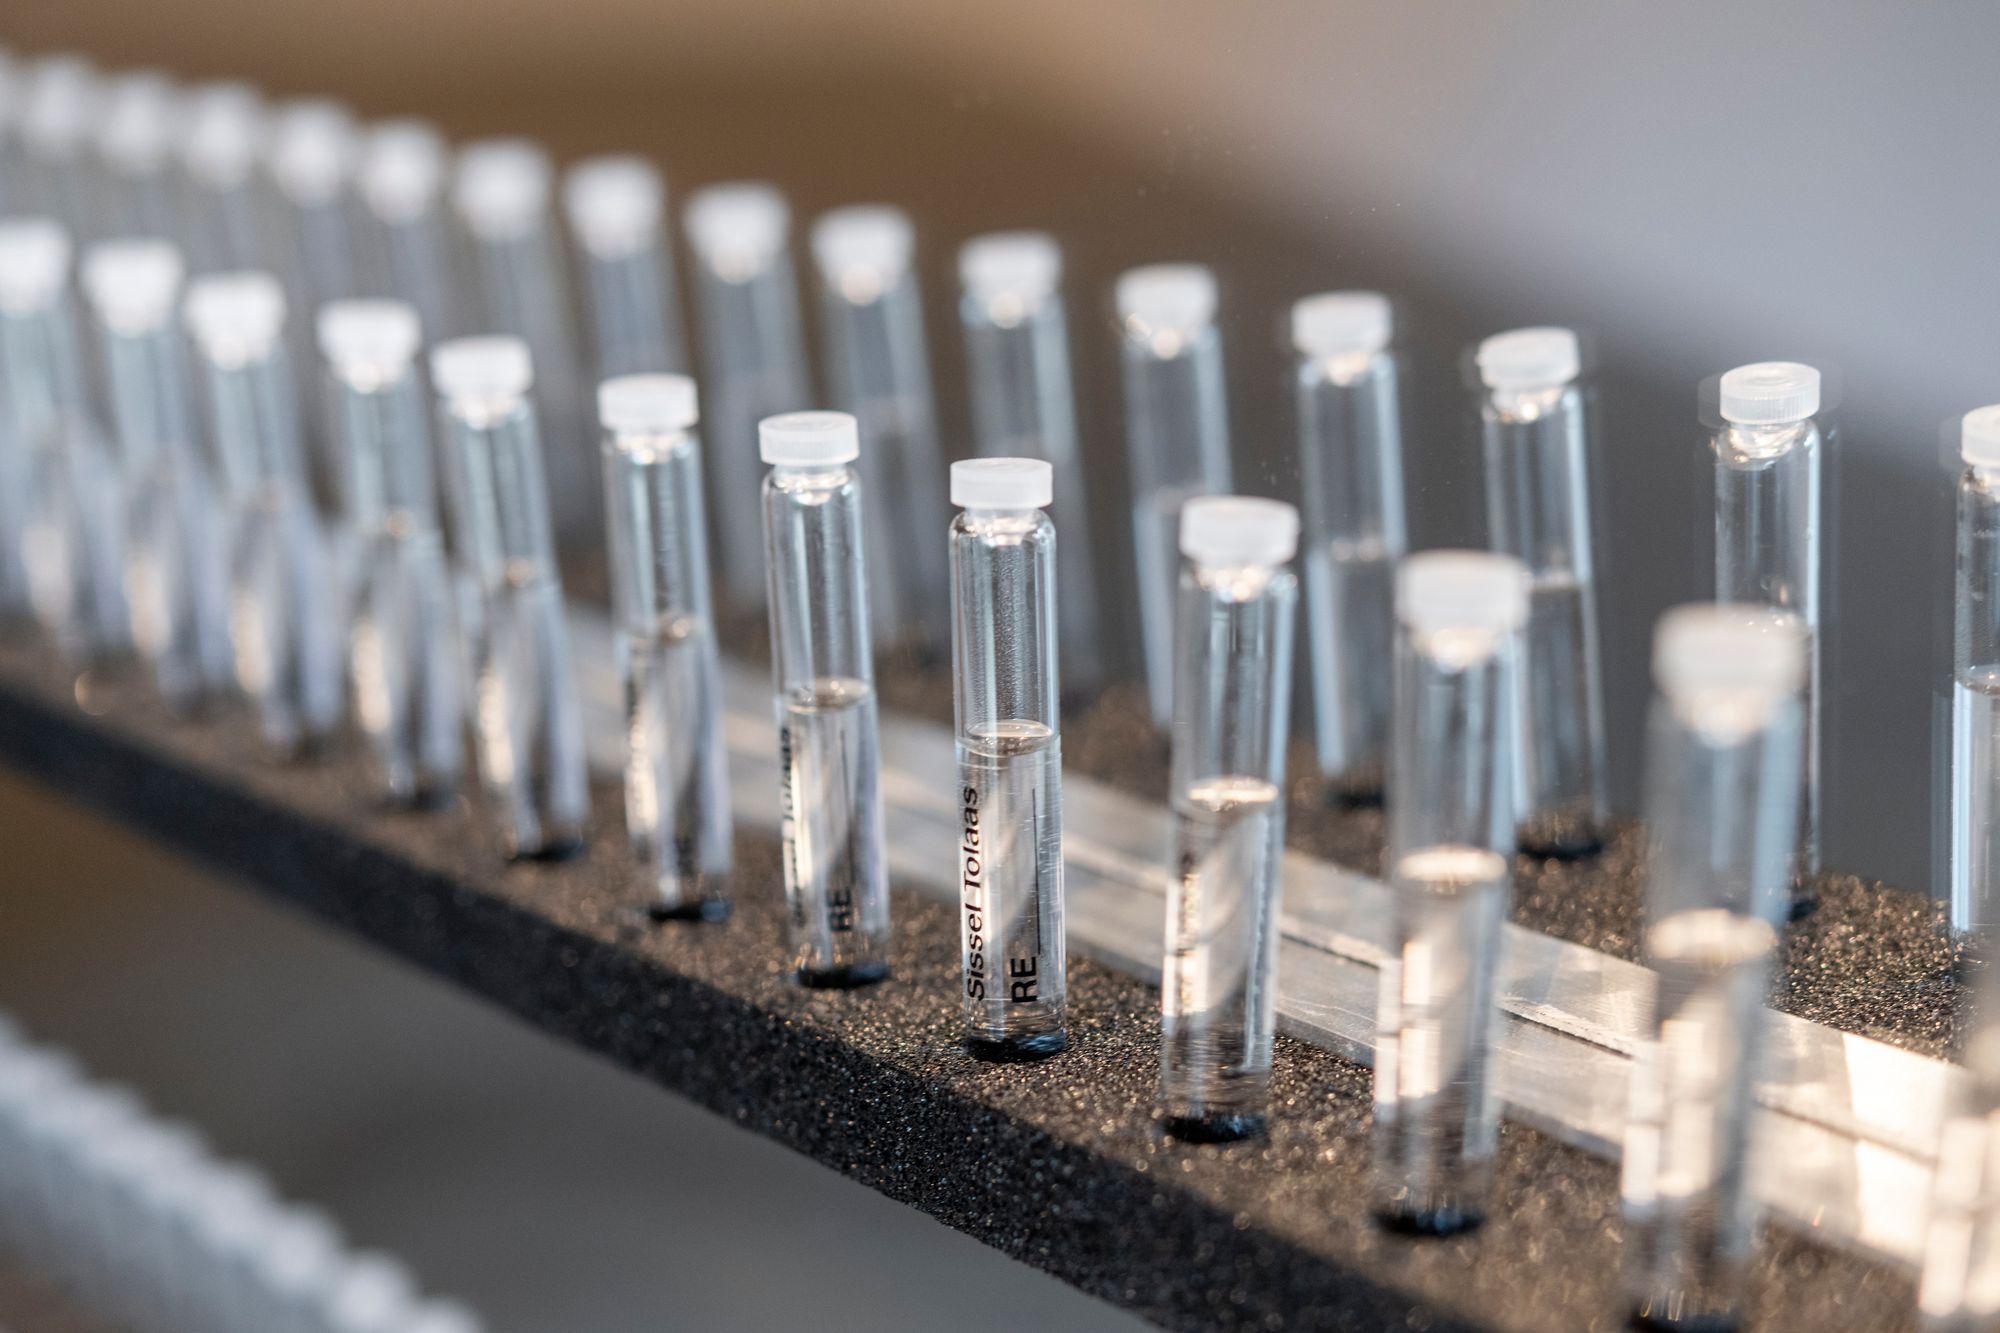 Rows of clear corked vials labeled "Sissel Tolaas", half-full of a transparent liquid.